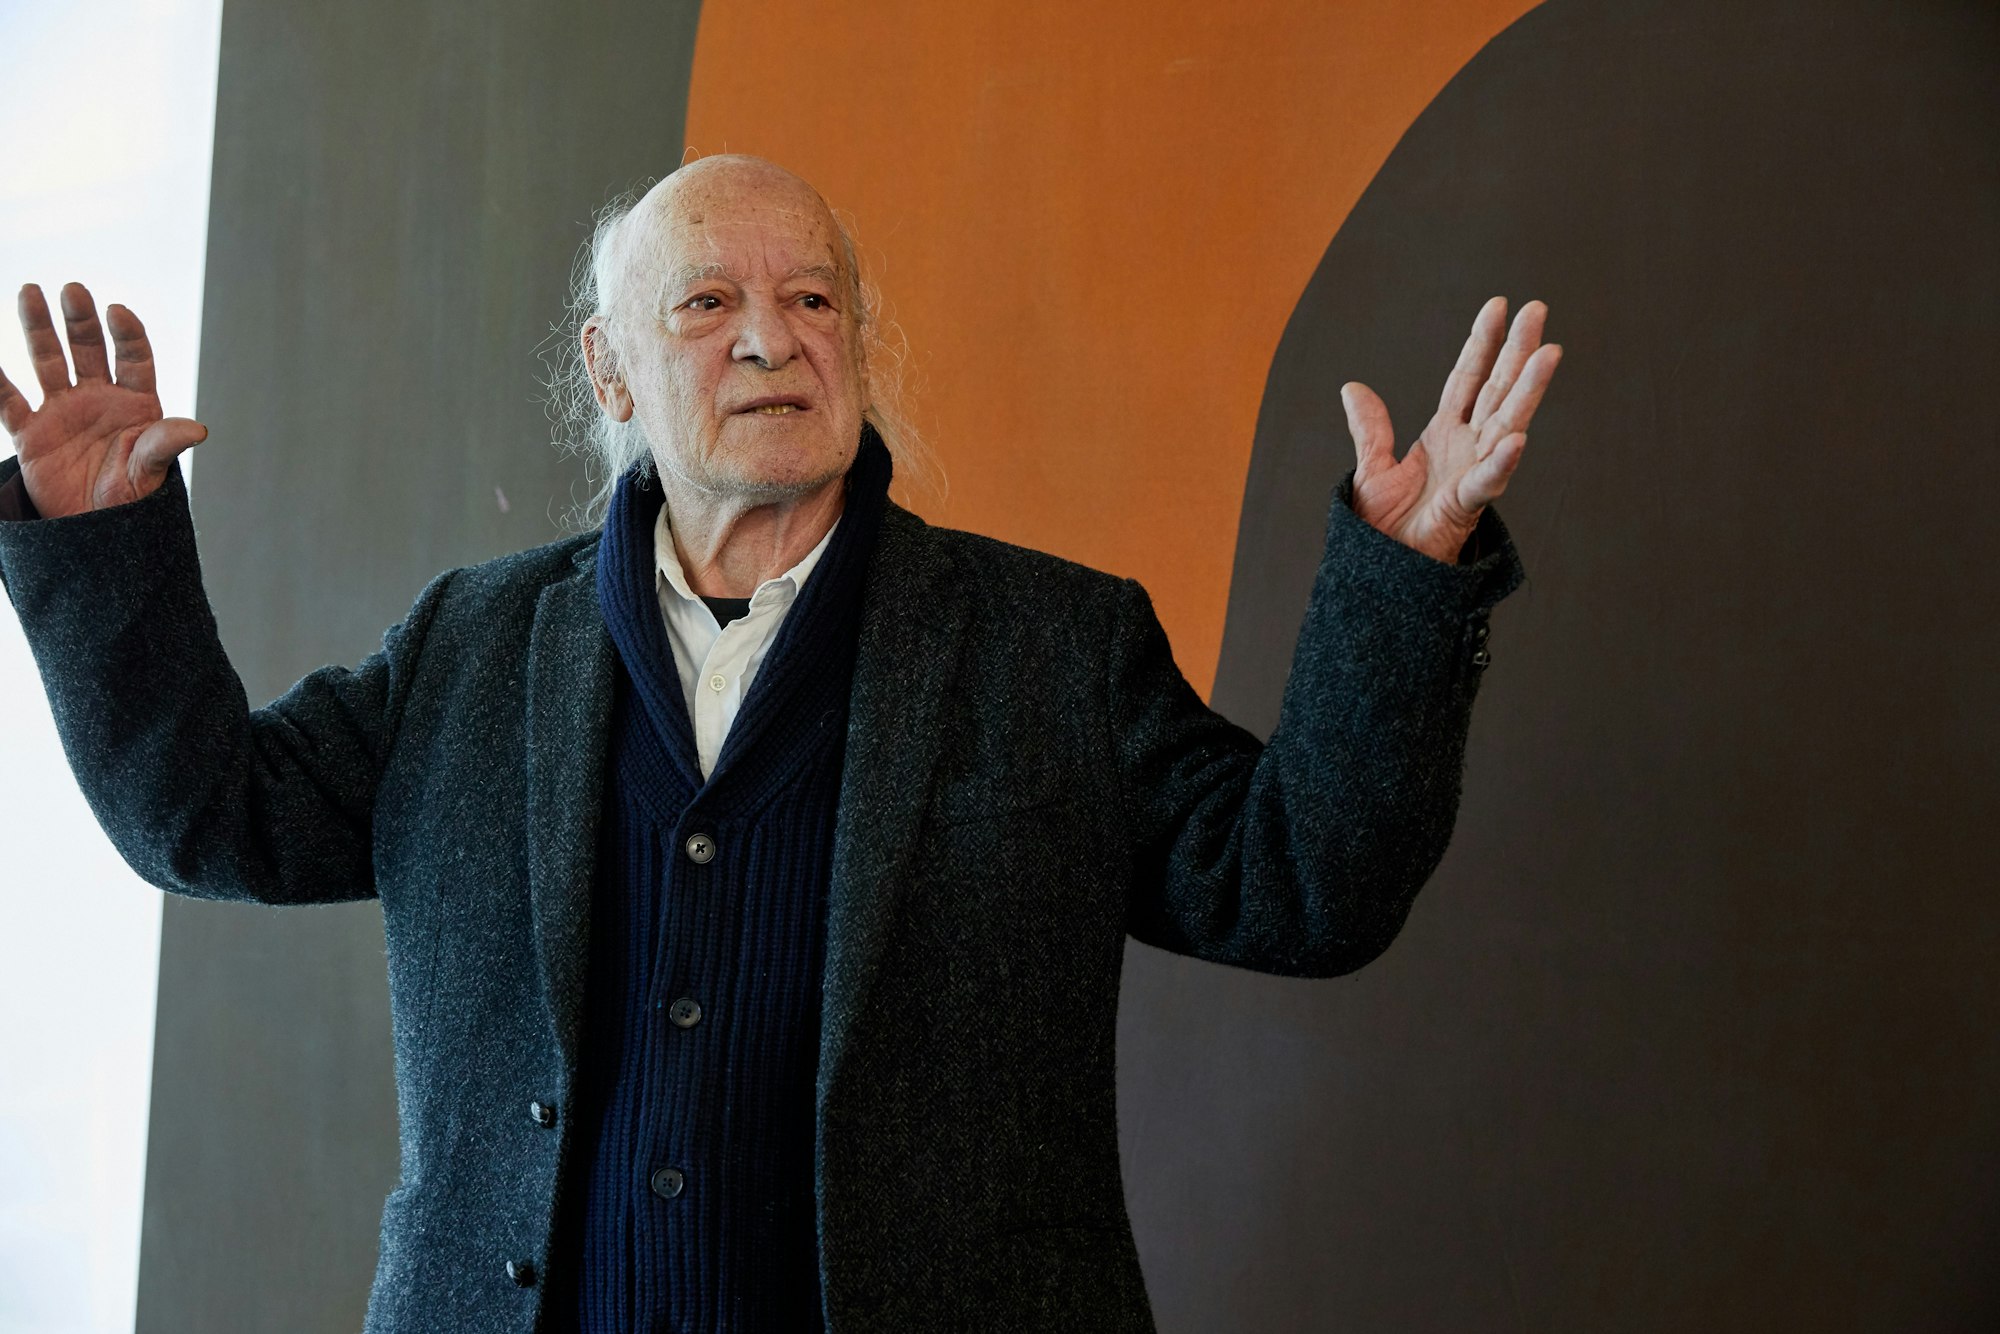 A balding man dressed in a white shirt and dark cardigan and coat in front of an abstract painting with his hands held up as he speaks.